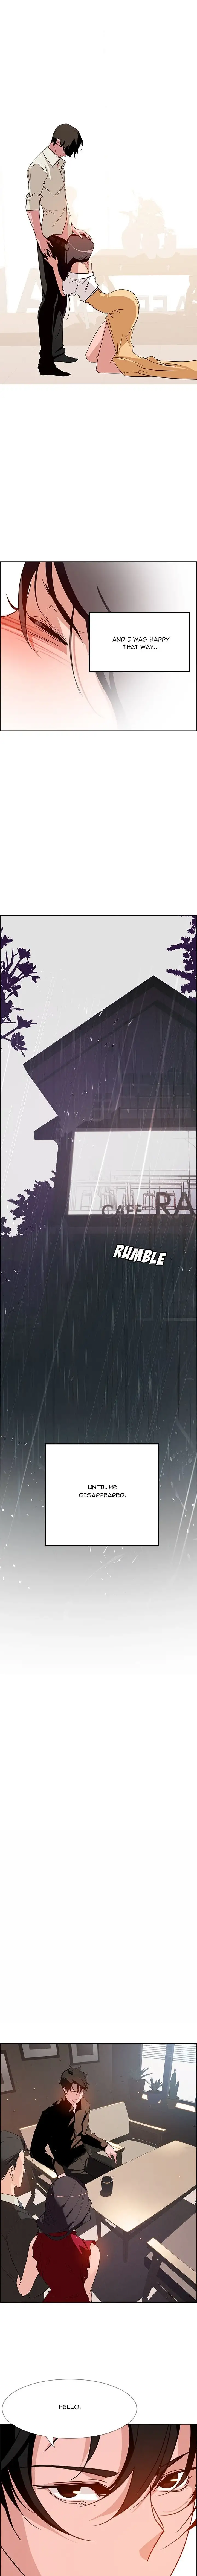 Rain Curtain - Chapter 9 Page 10